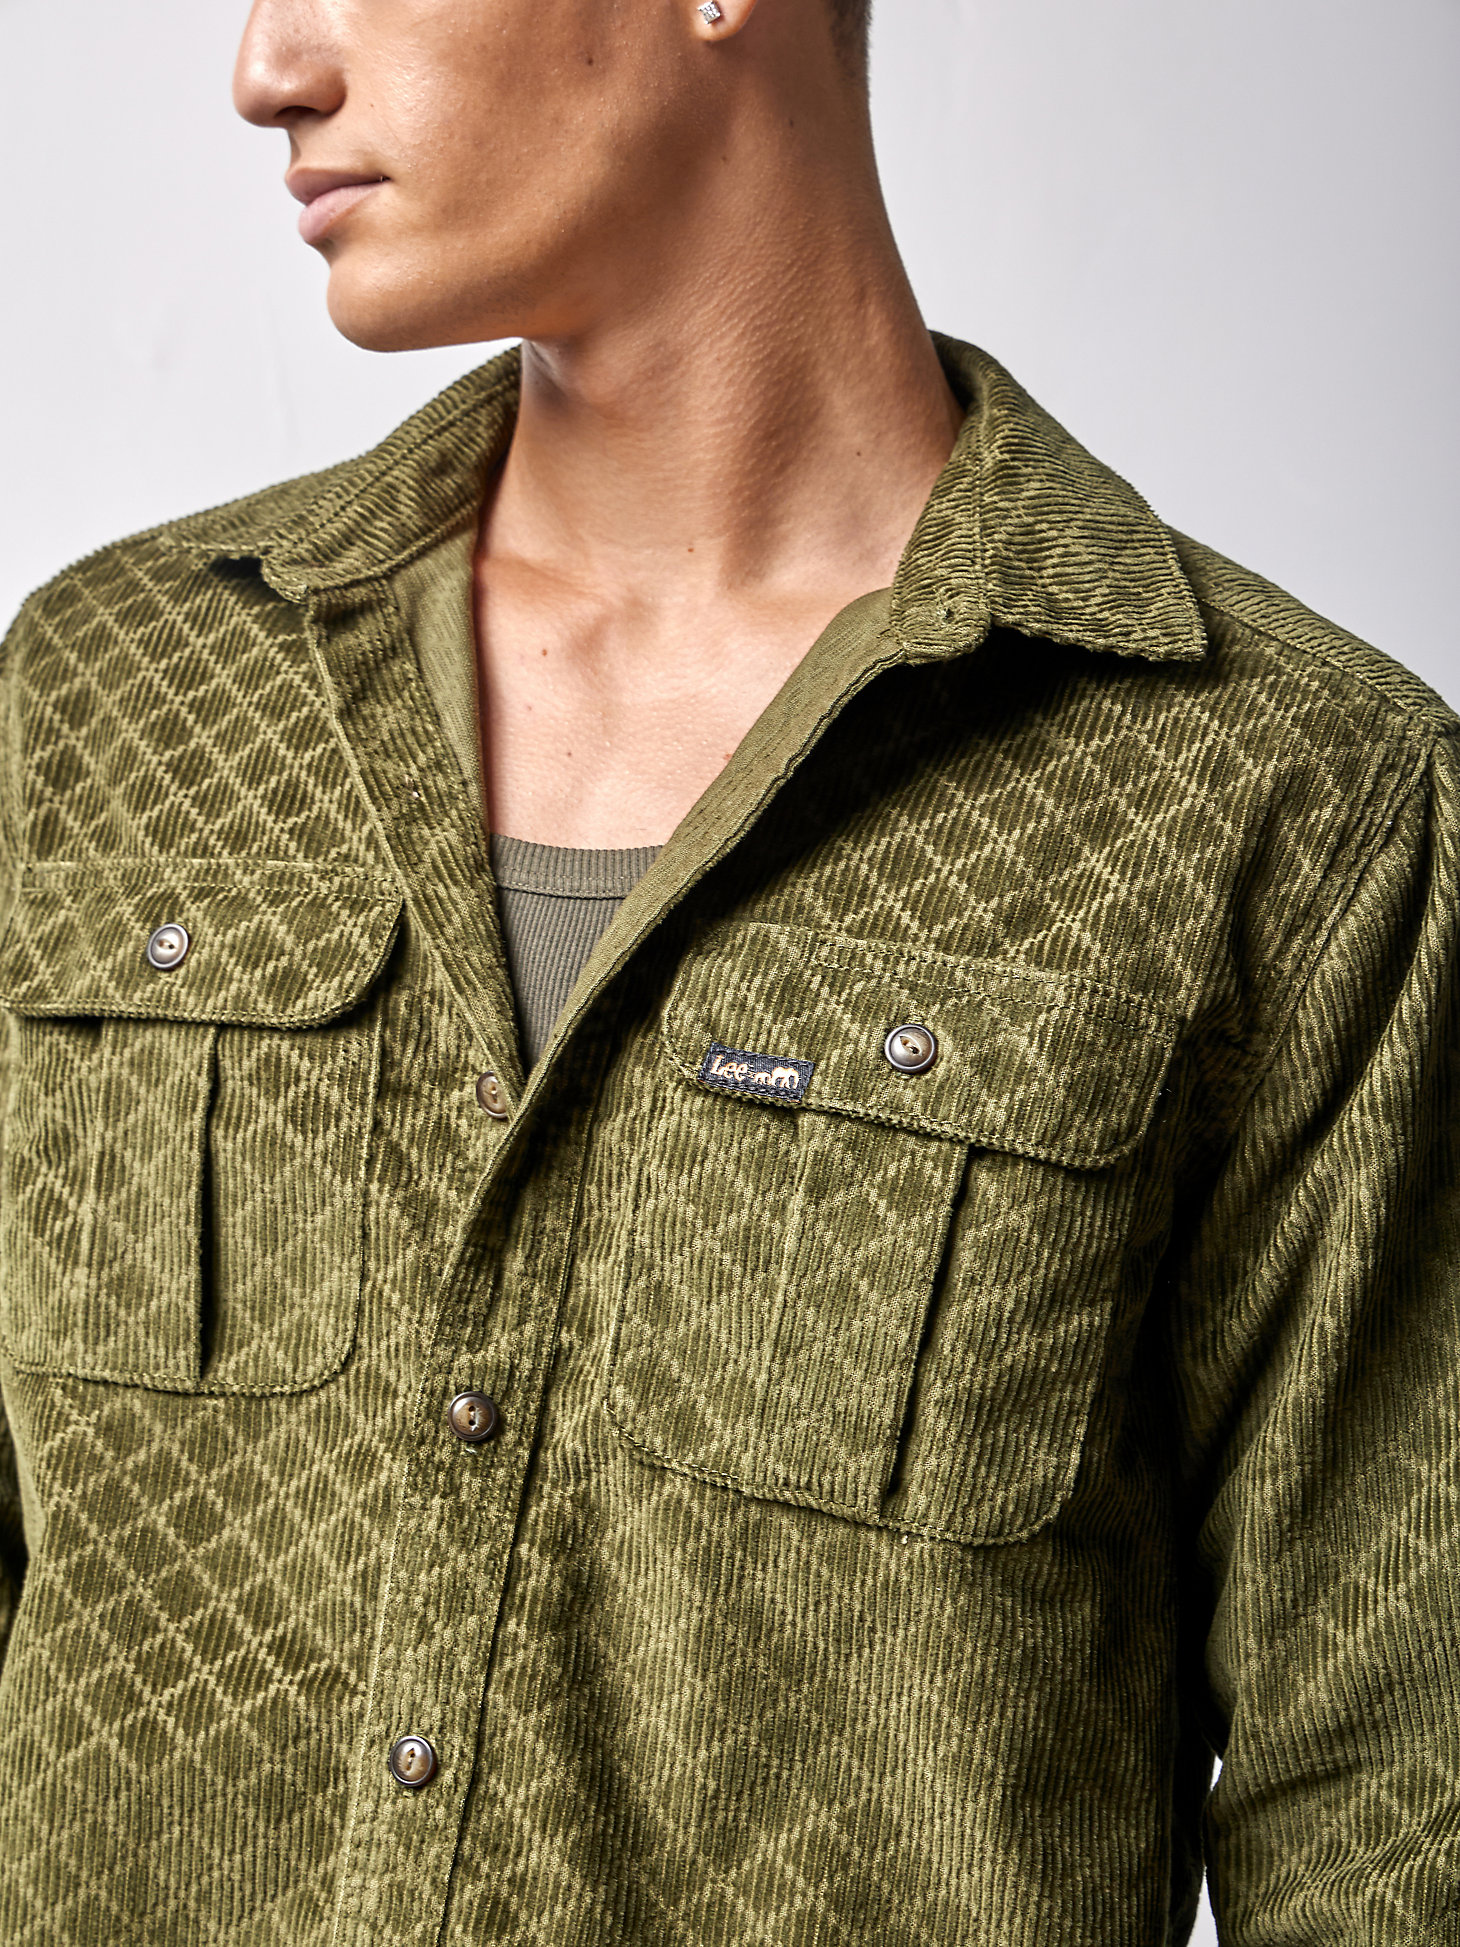 Men's Lee® x The Brooklyn Circus® Working West Corduroy Button Down Shirt in Kale alternative view 3